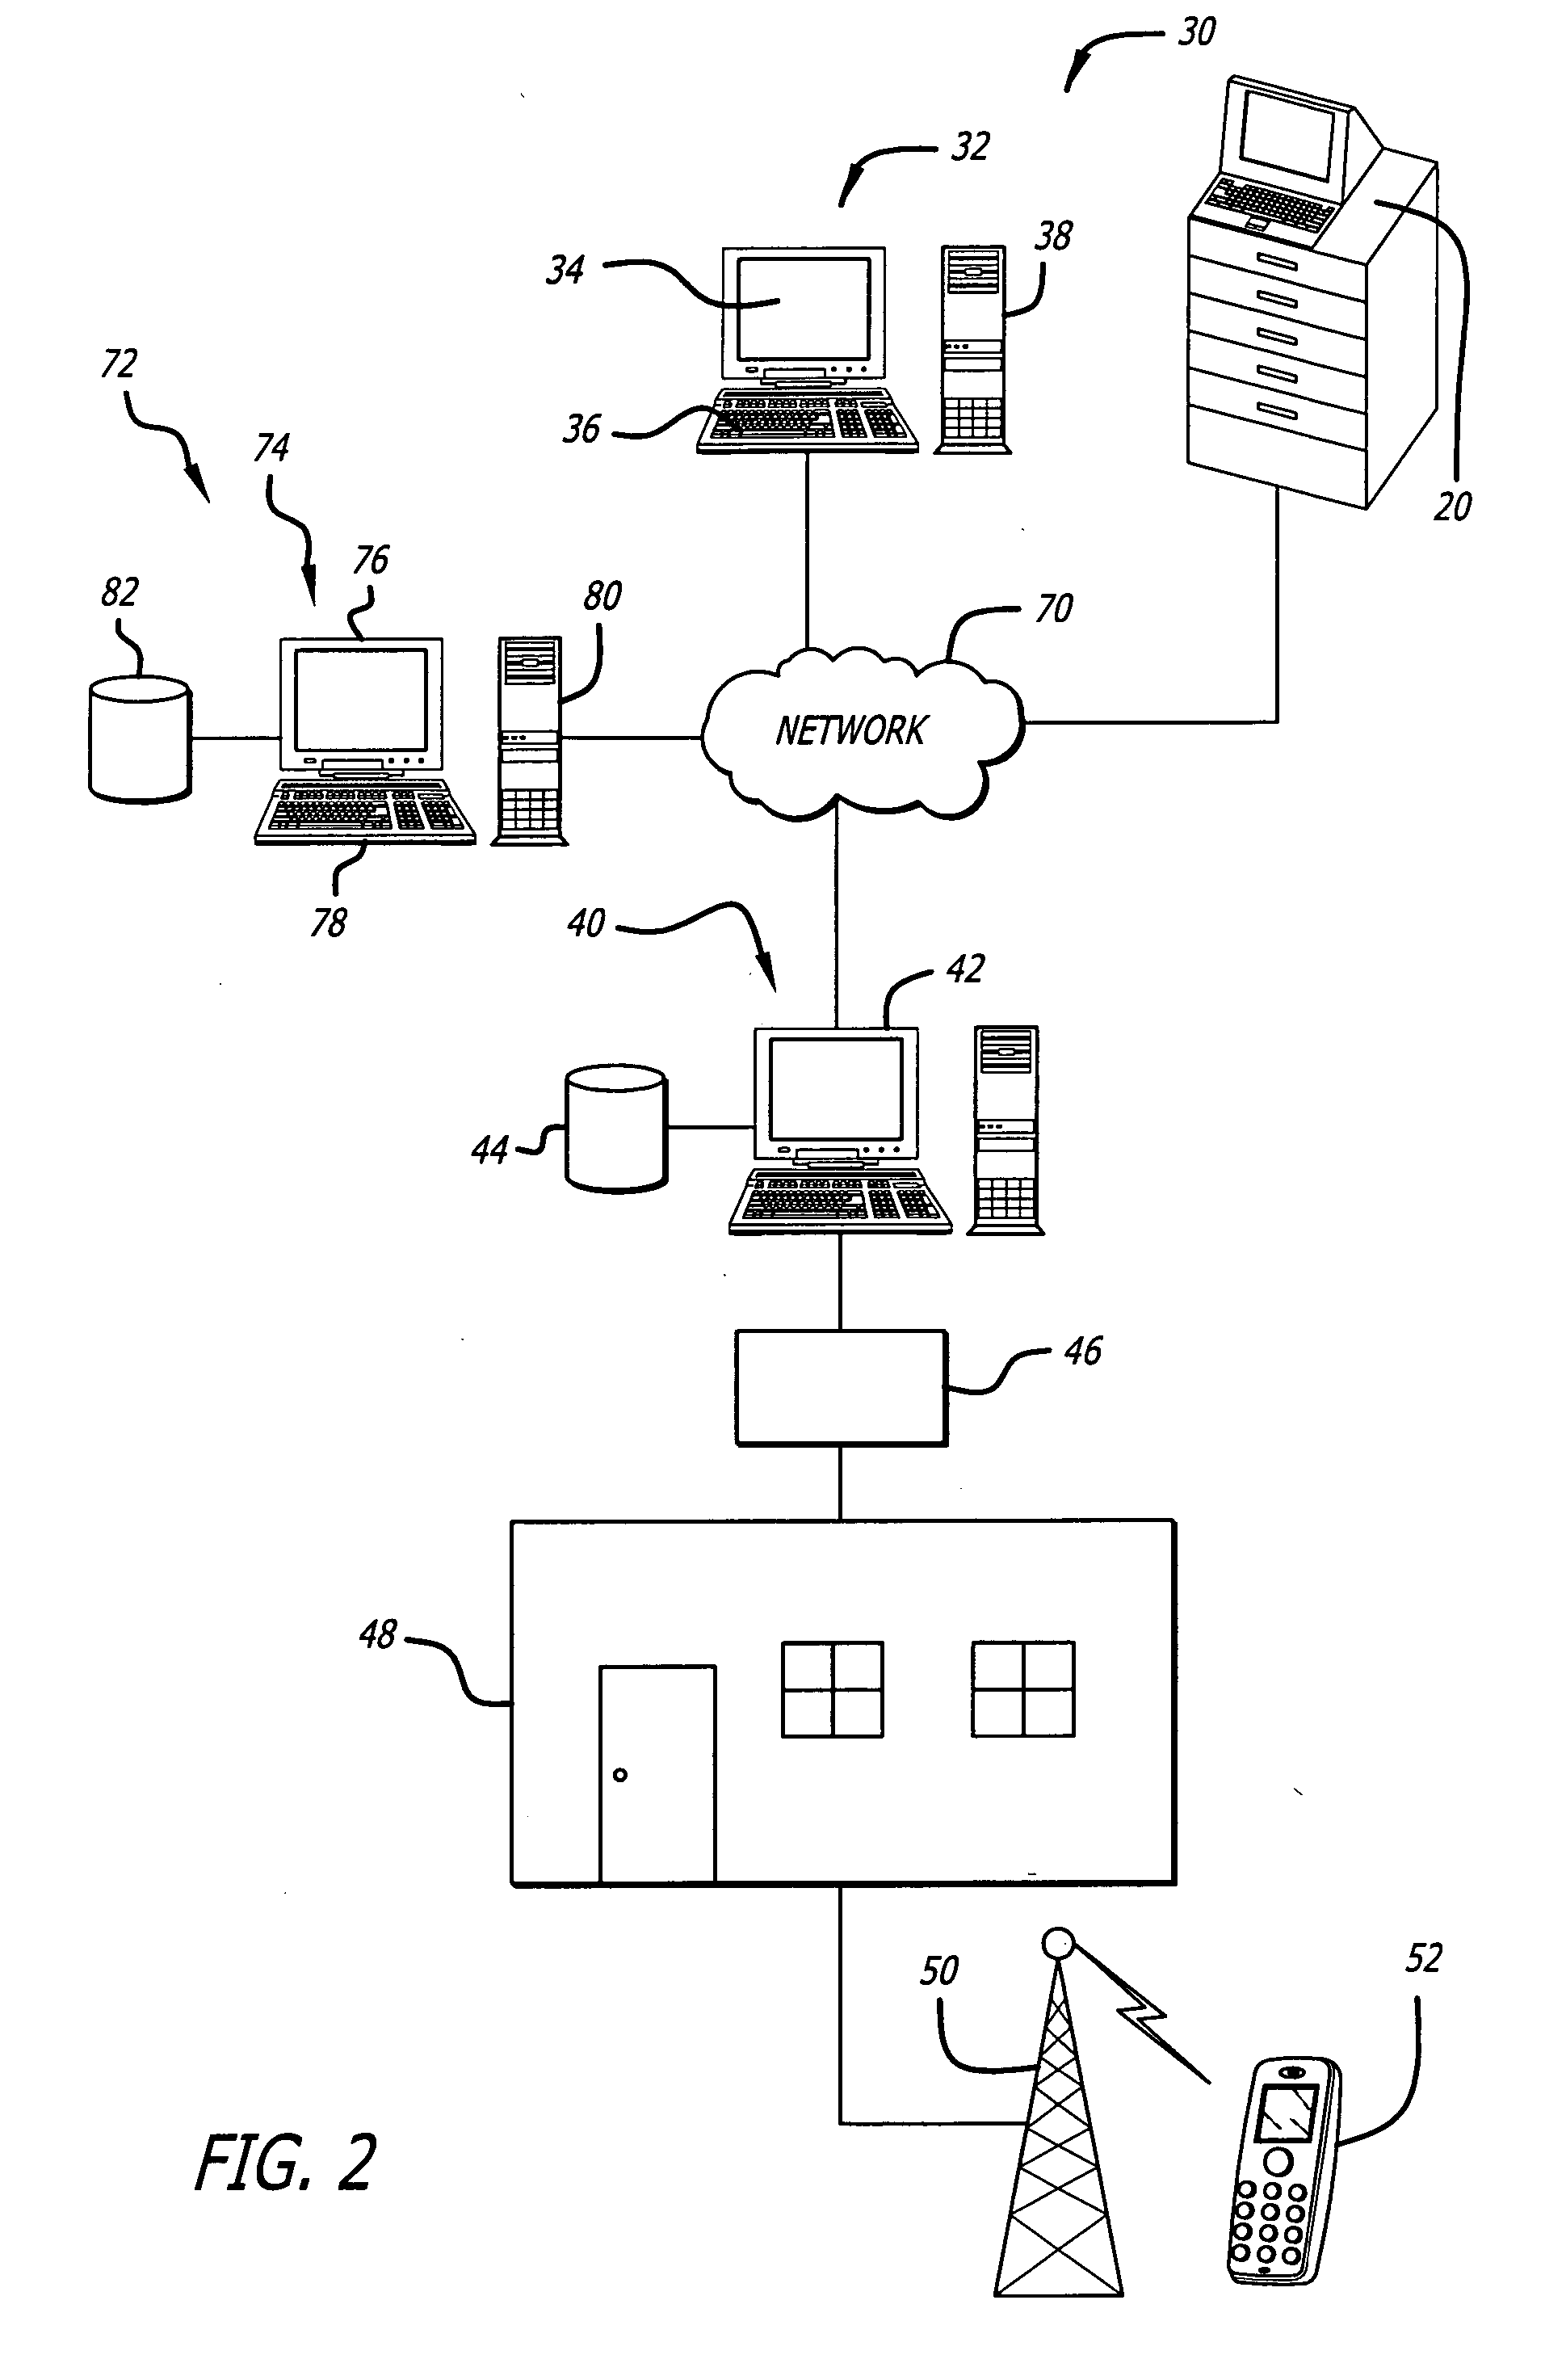 System and method for managing patient care through automated messaging